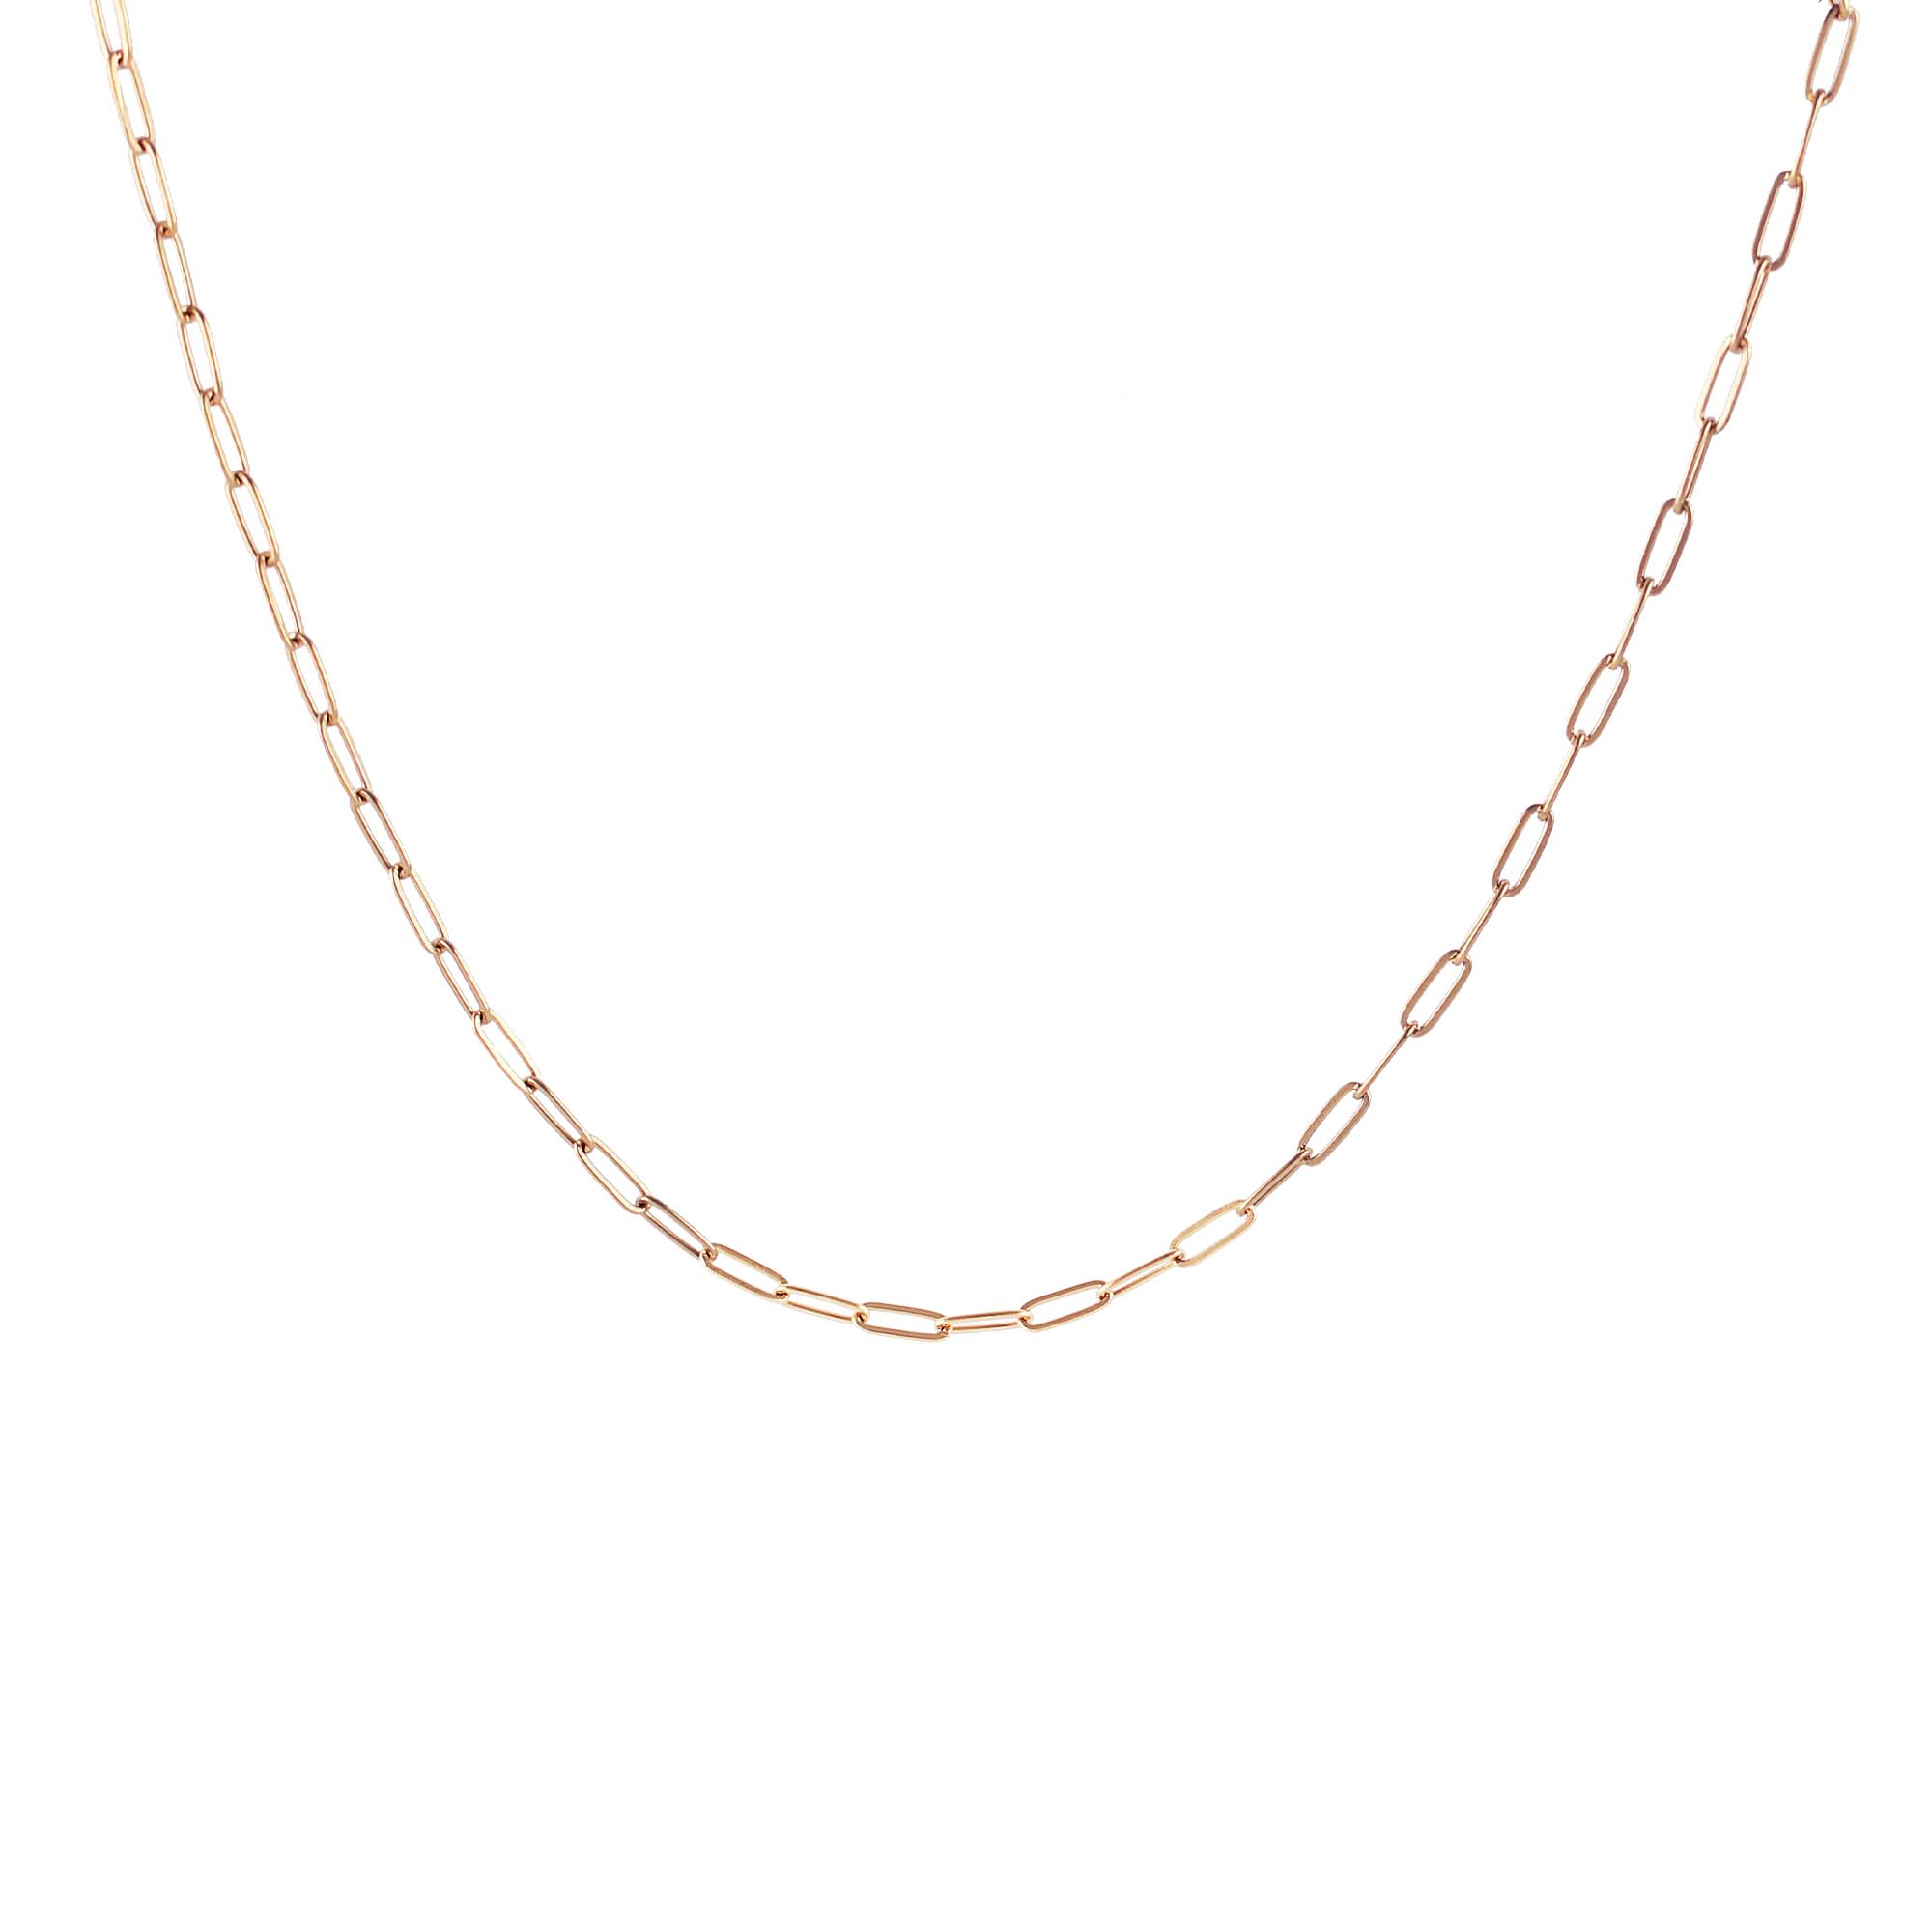 Maritsa women's necklace by Five Jwlry, crafted from a 3mm paperclip chain in rose gold colored, water-resistant 316L stainless steel. Available in size 37cm with a 5cm extension. Hypoallergenic with a 2-year warranty.